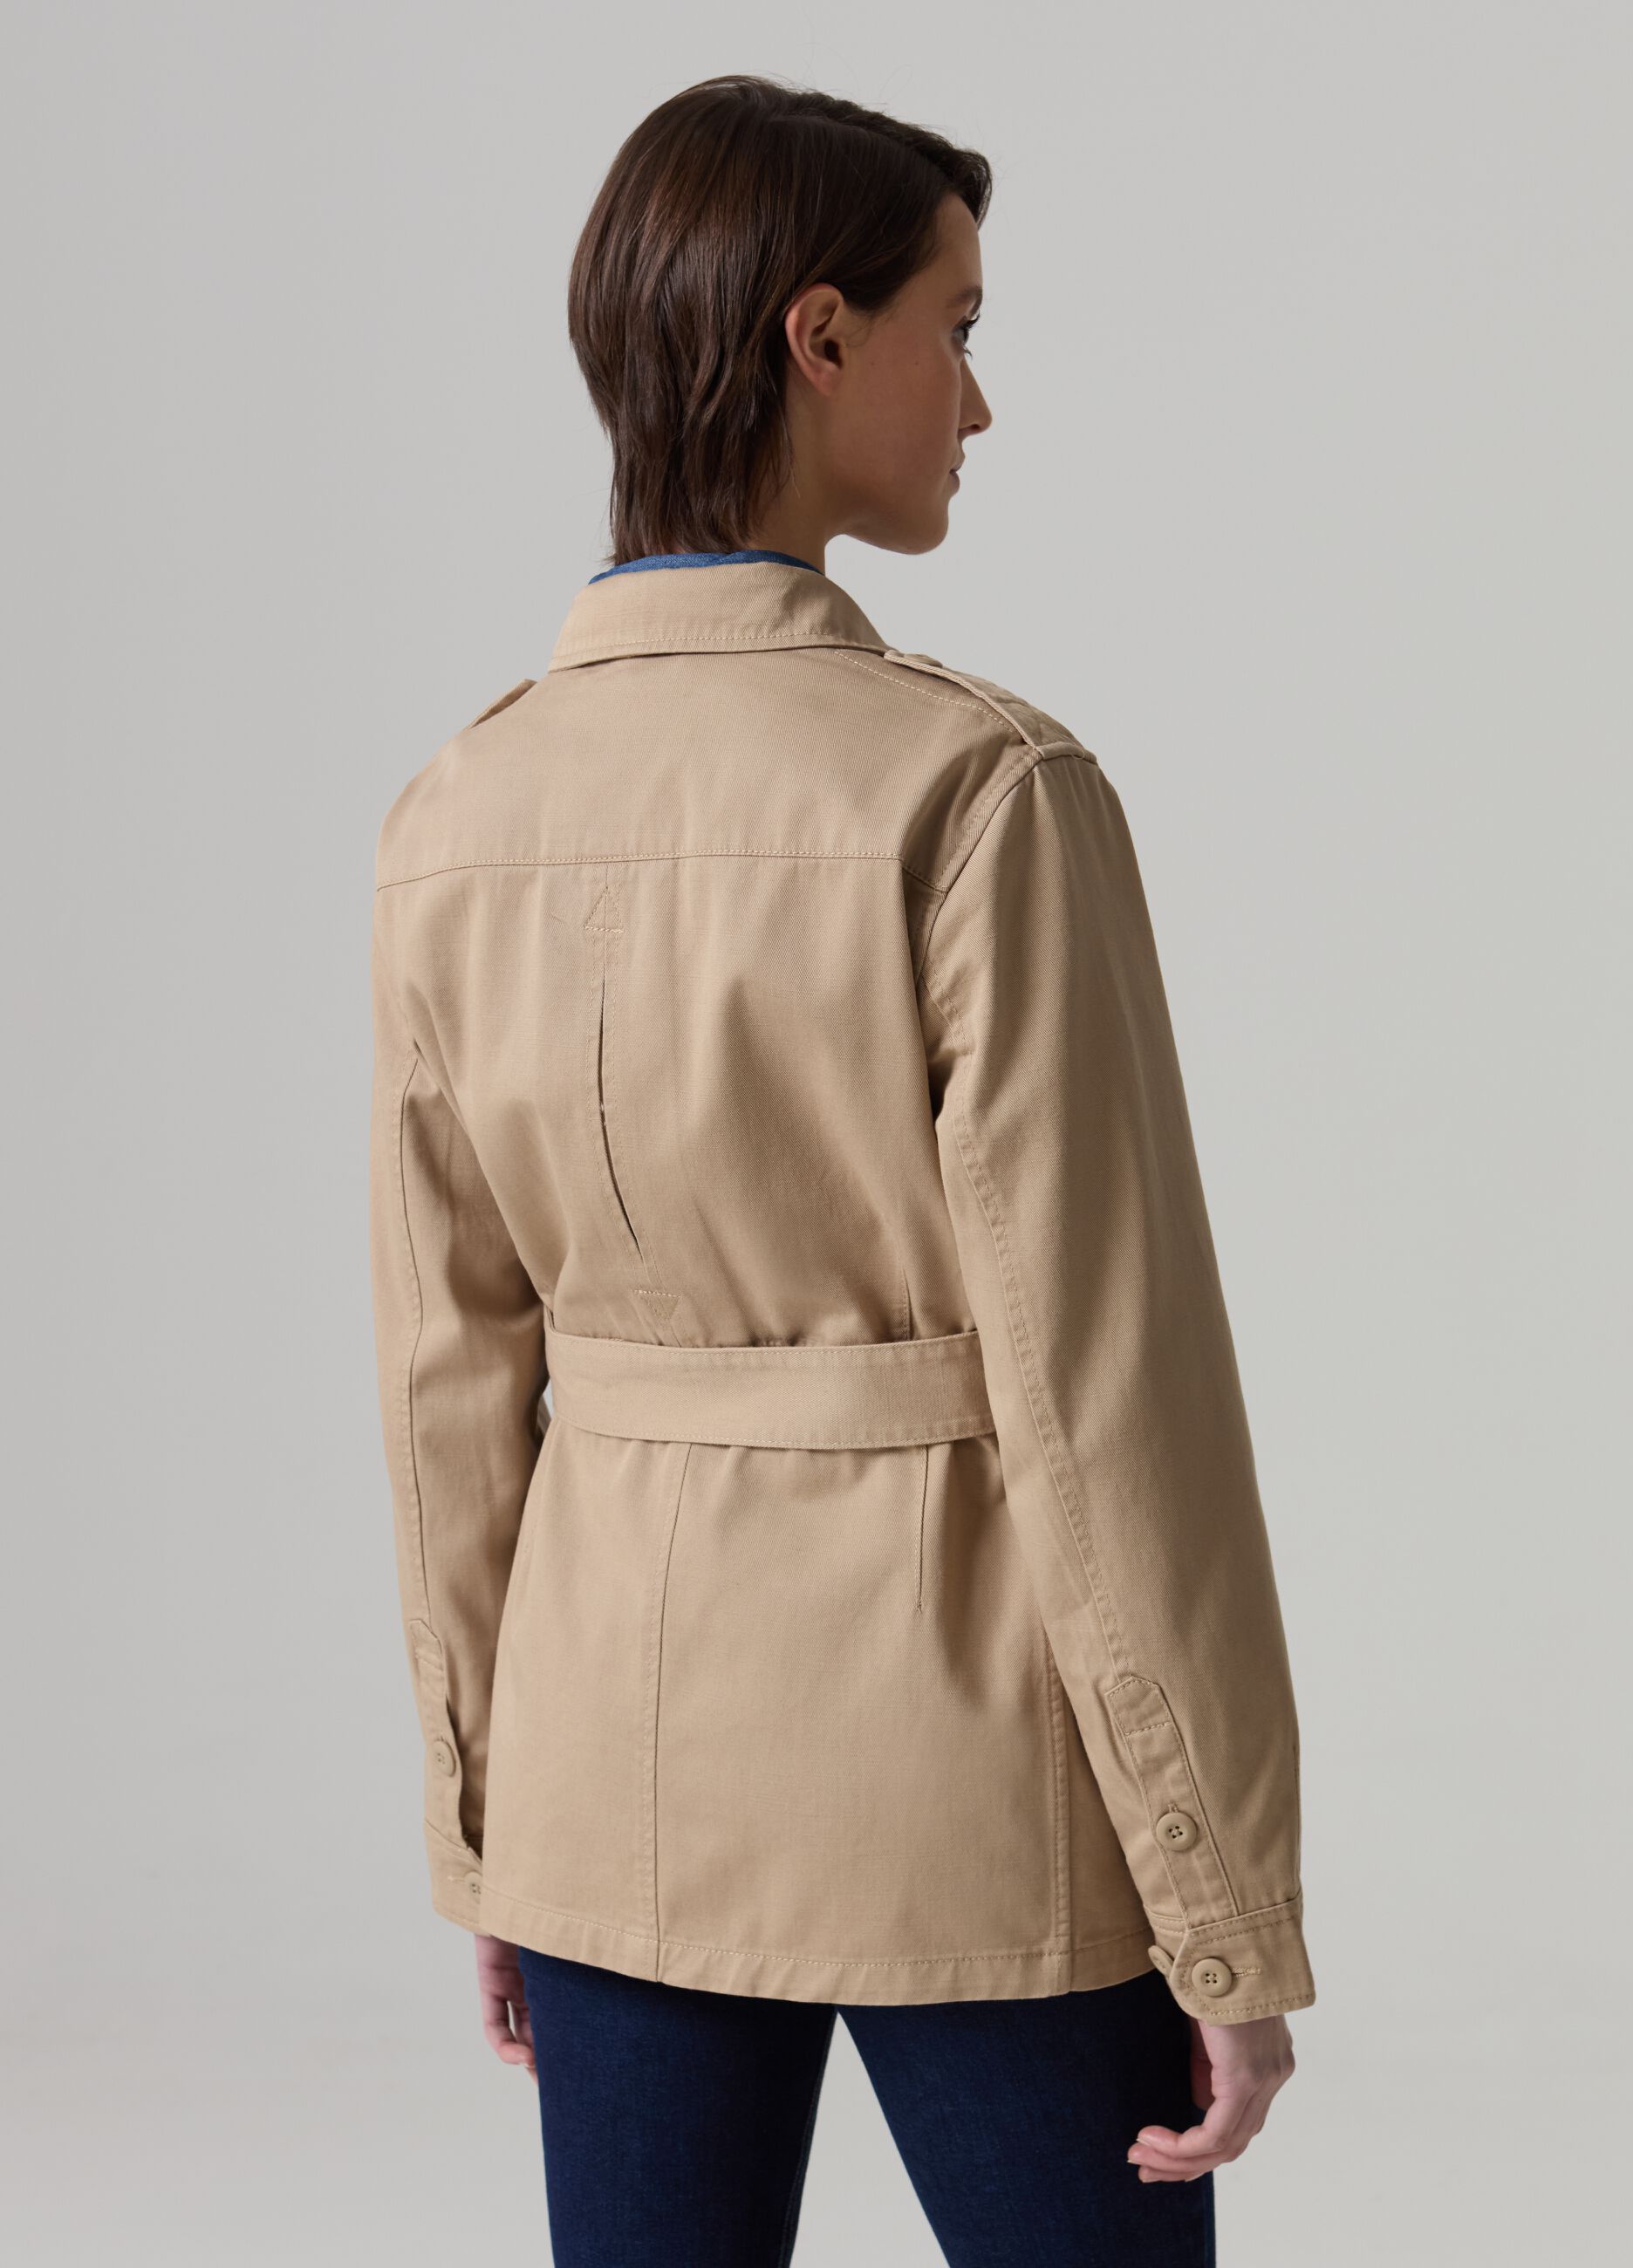 Safari jacket with buttons and belt_2